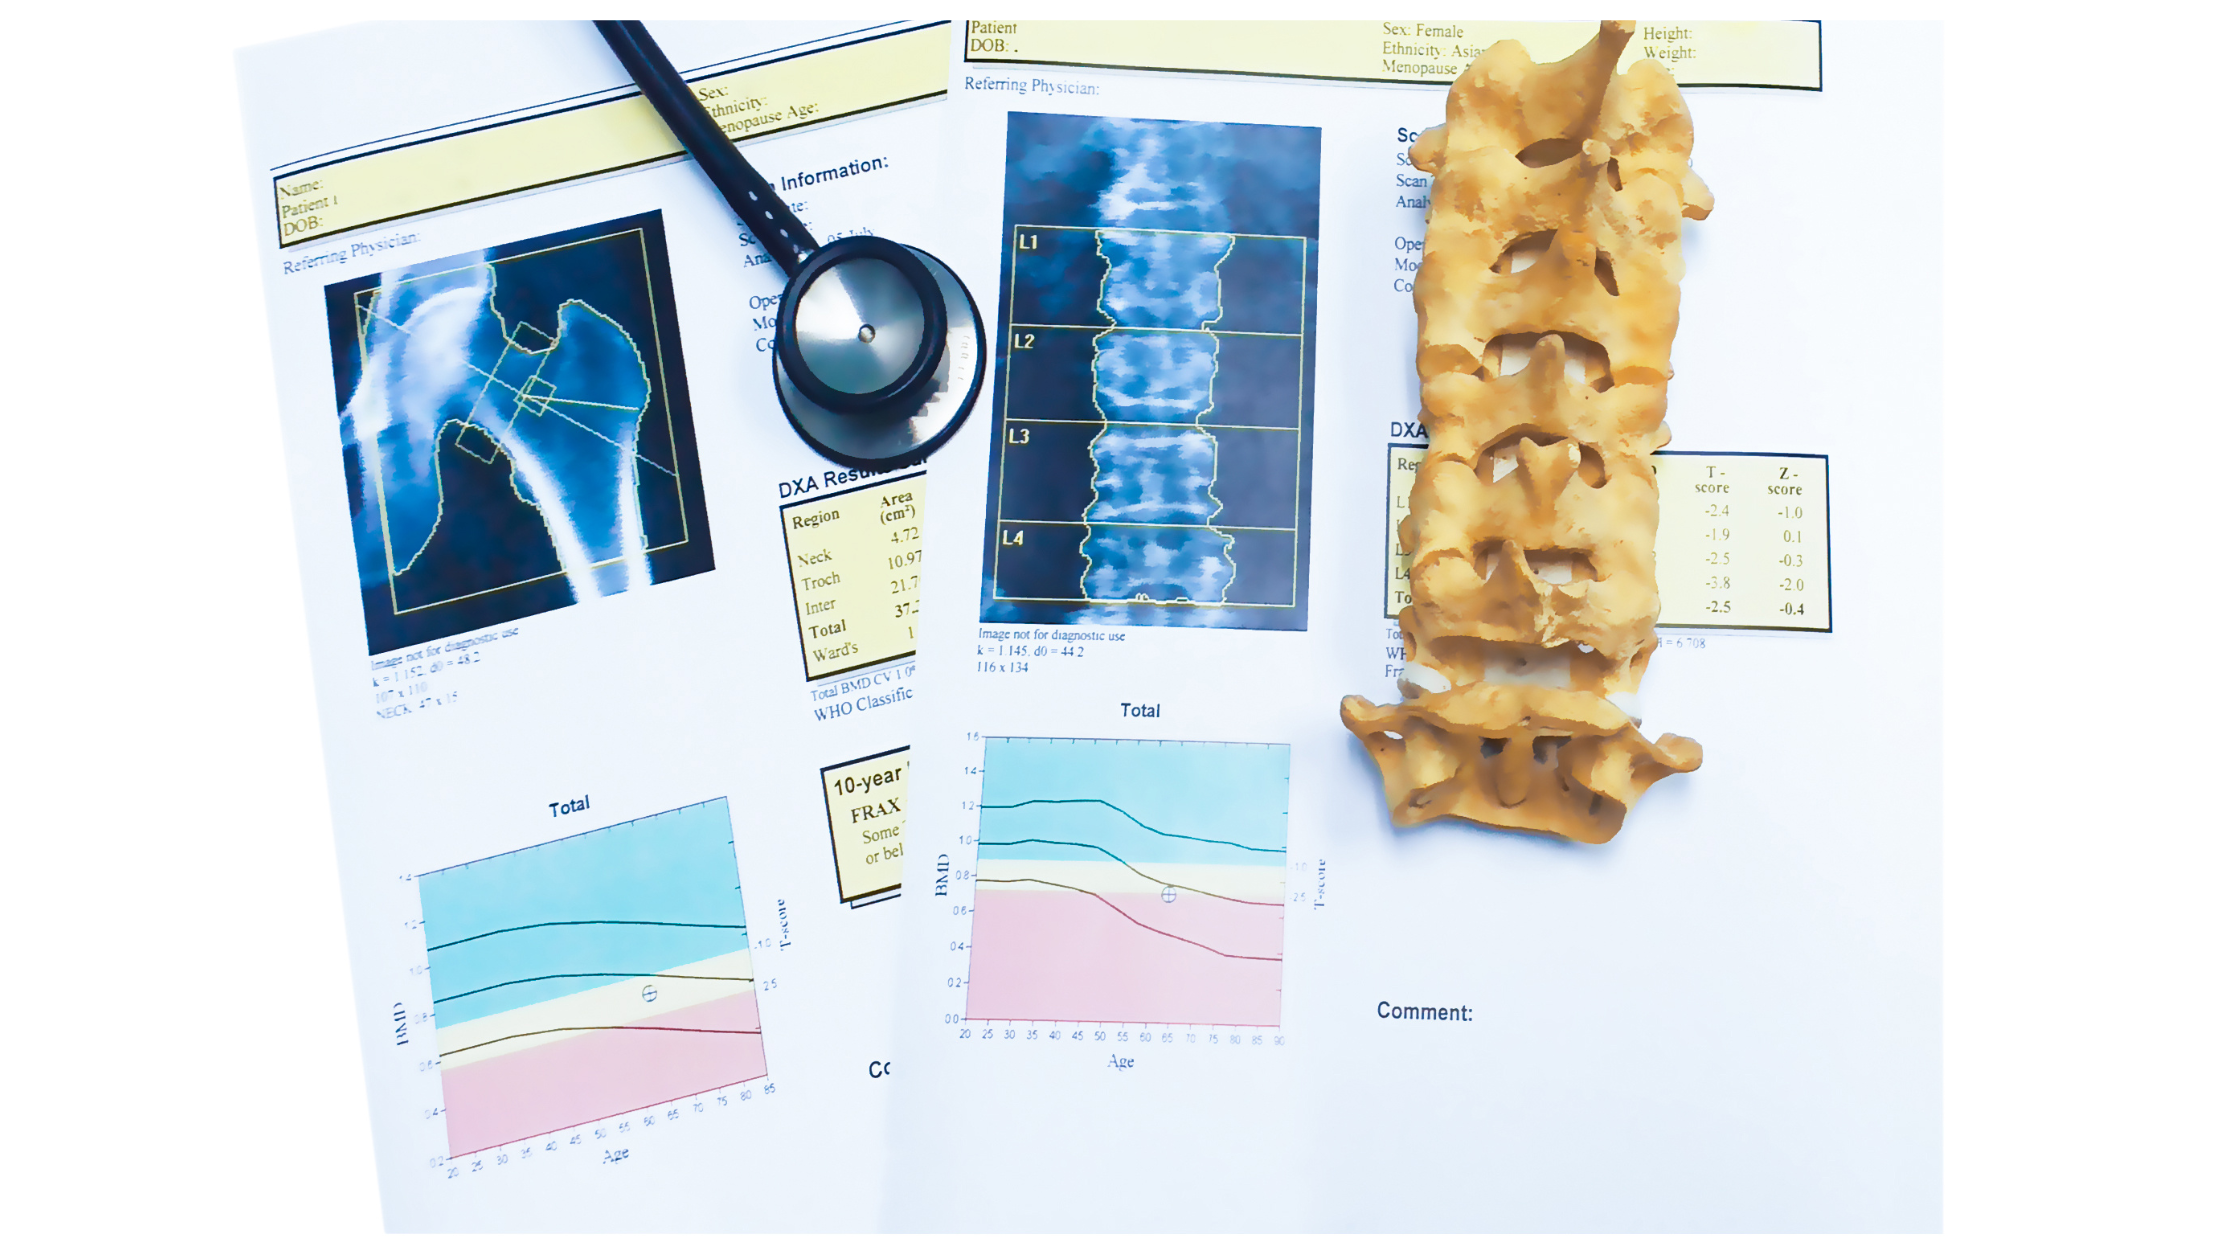 stethoscope and a partial spinal cord sitting on medical charts